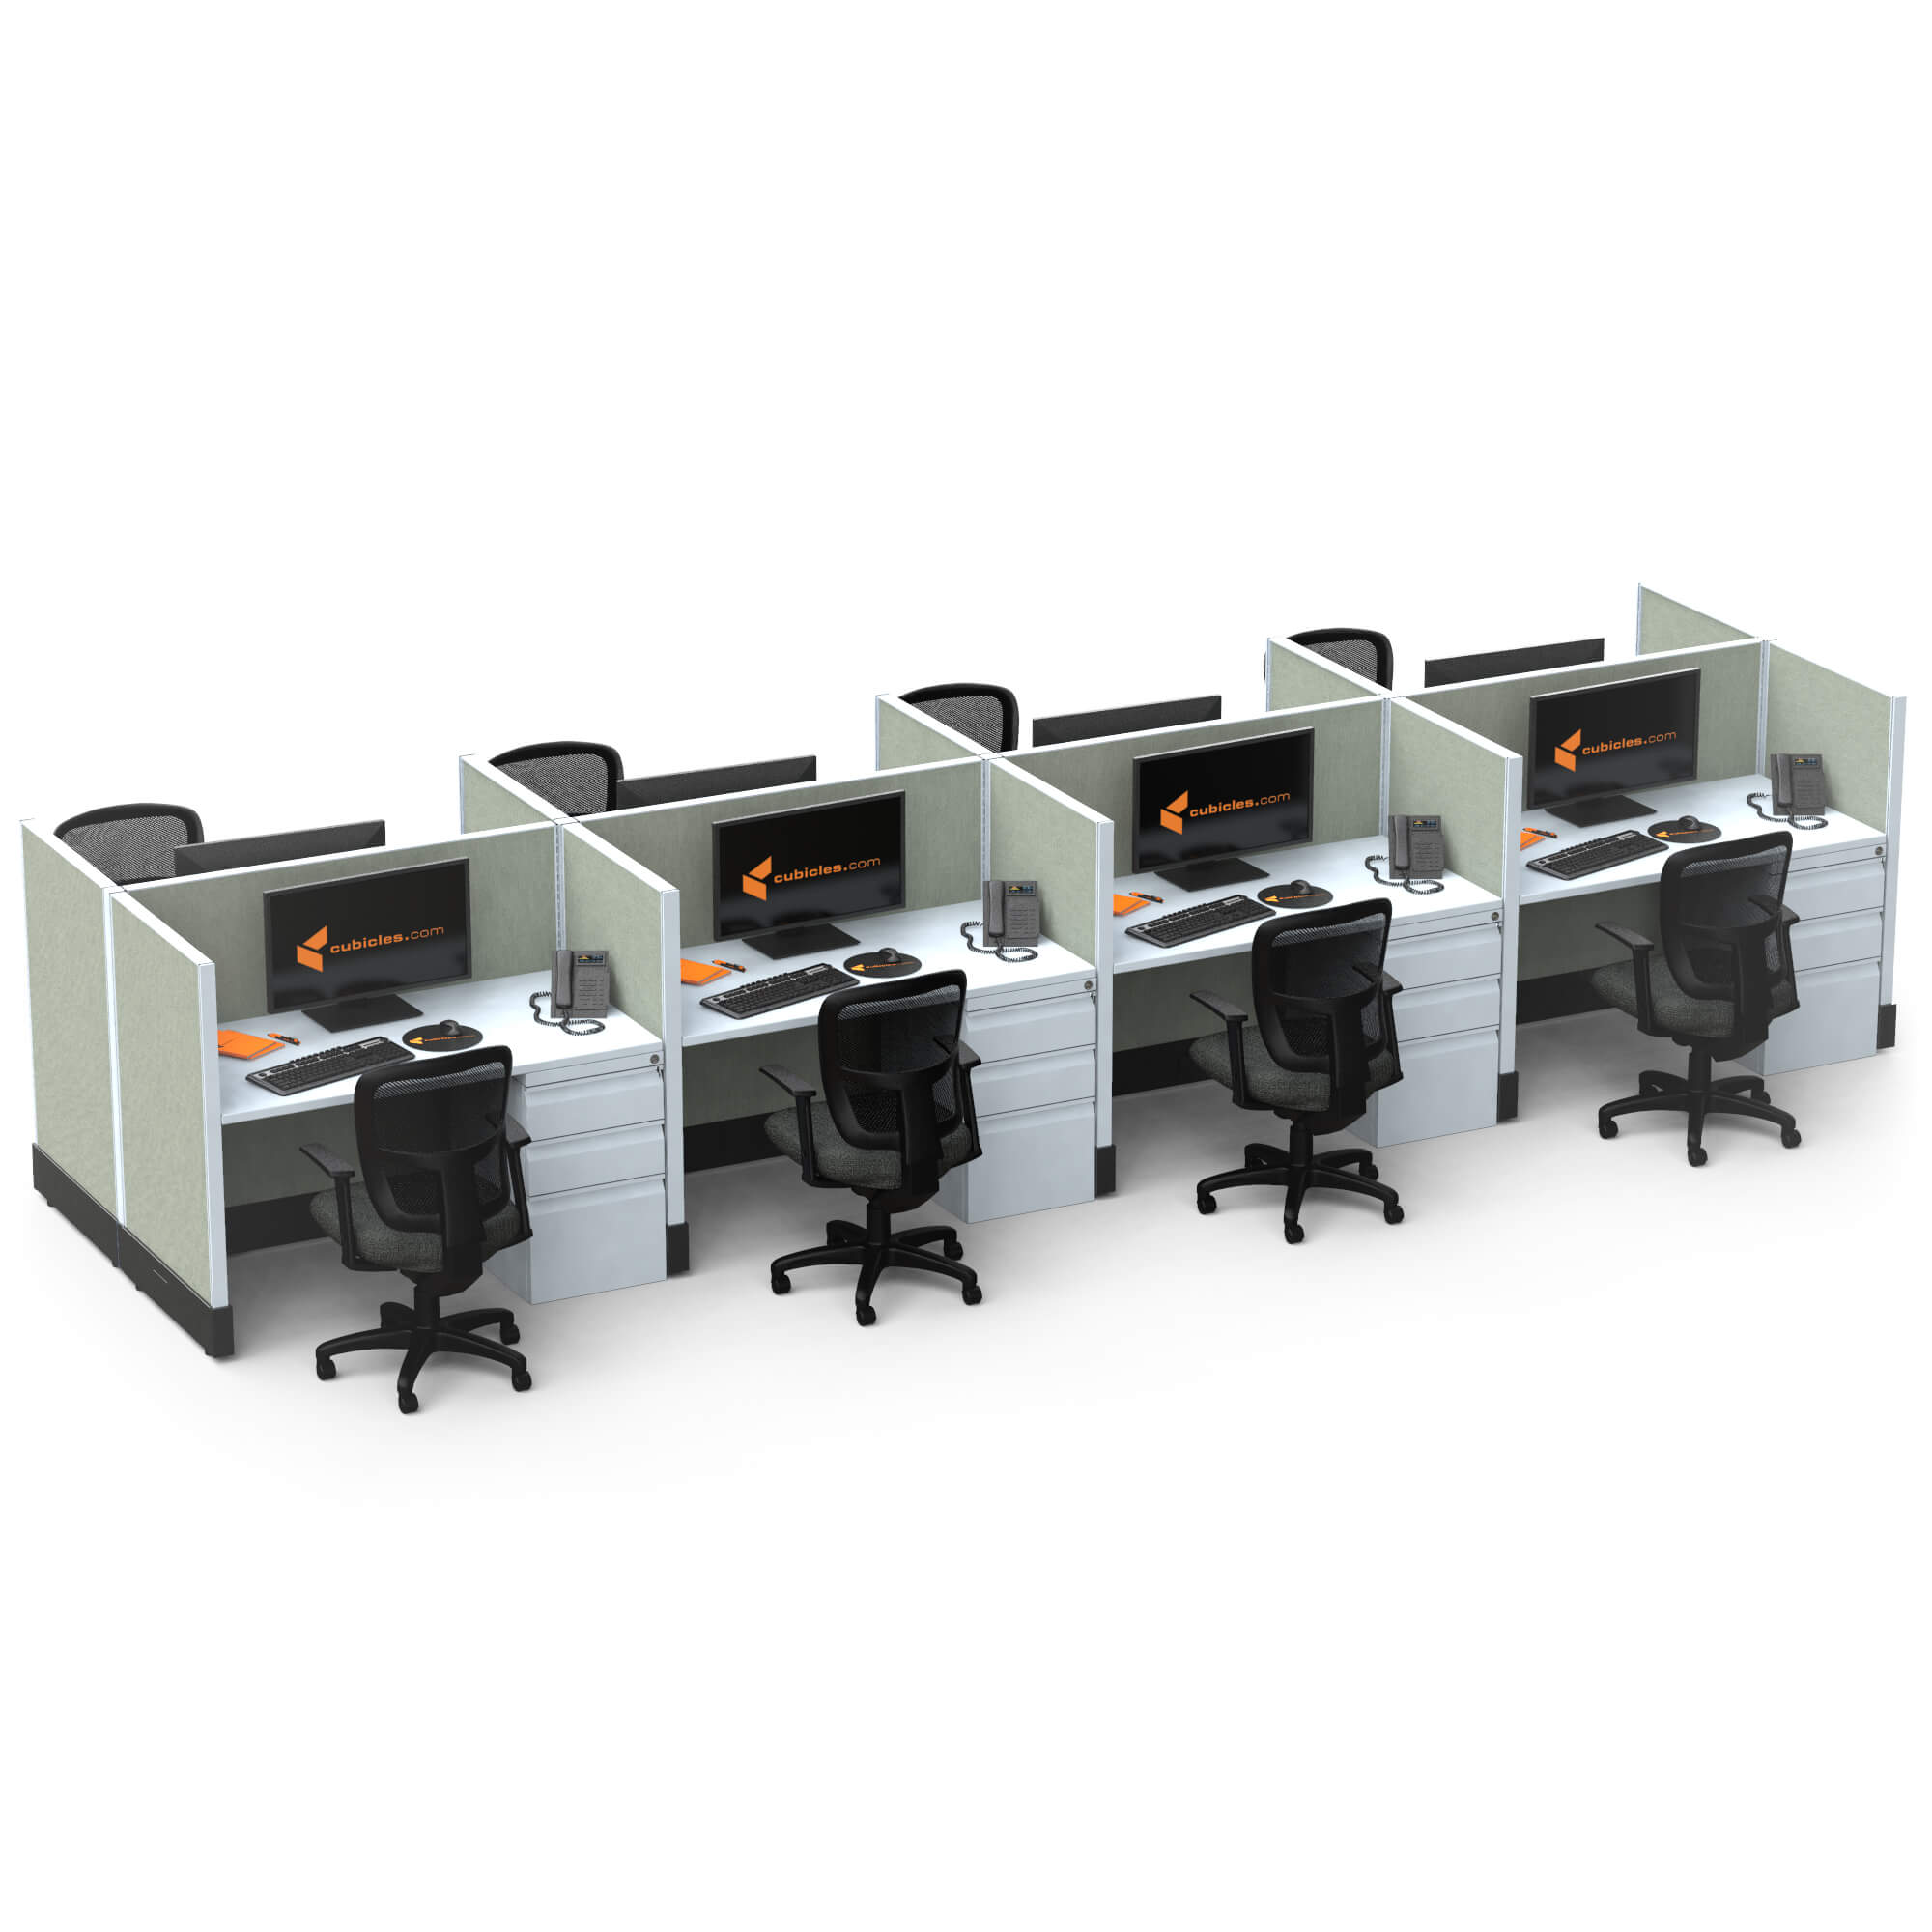 hot-desking-small-office-cubicles-8c-pack.jpg